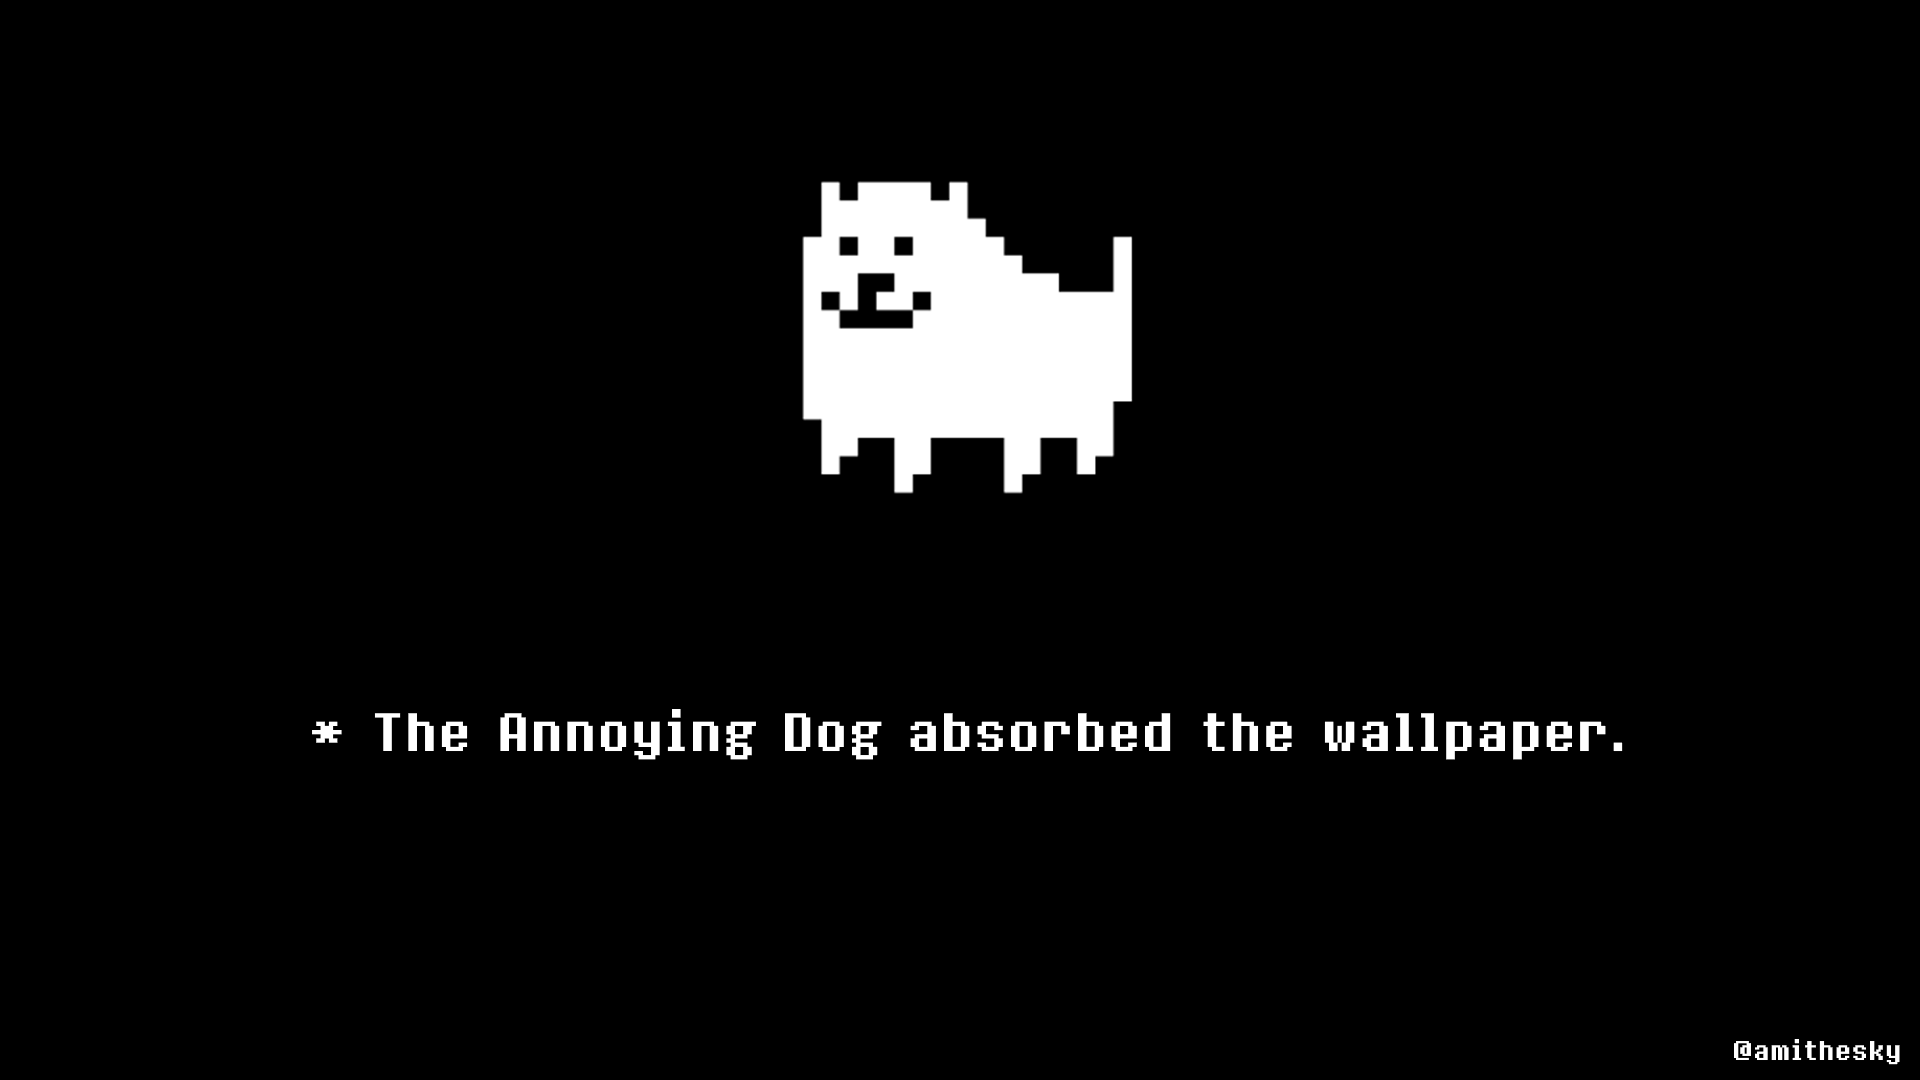 Better Quality Annoying Dog Wallpaper! Mobile version in comments. Feel free to edit out the watermark if you use it as a wallpaper, but please keep it there if you repost it